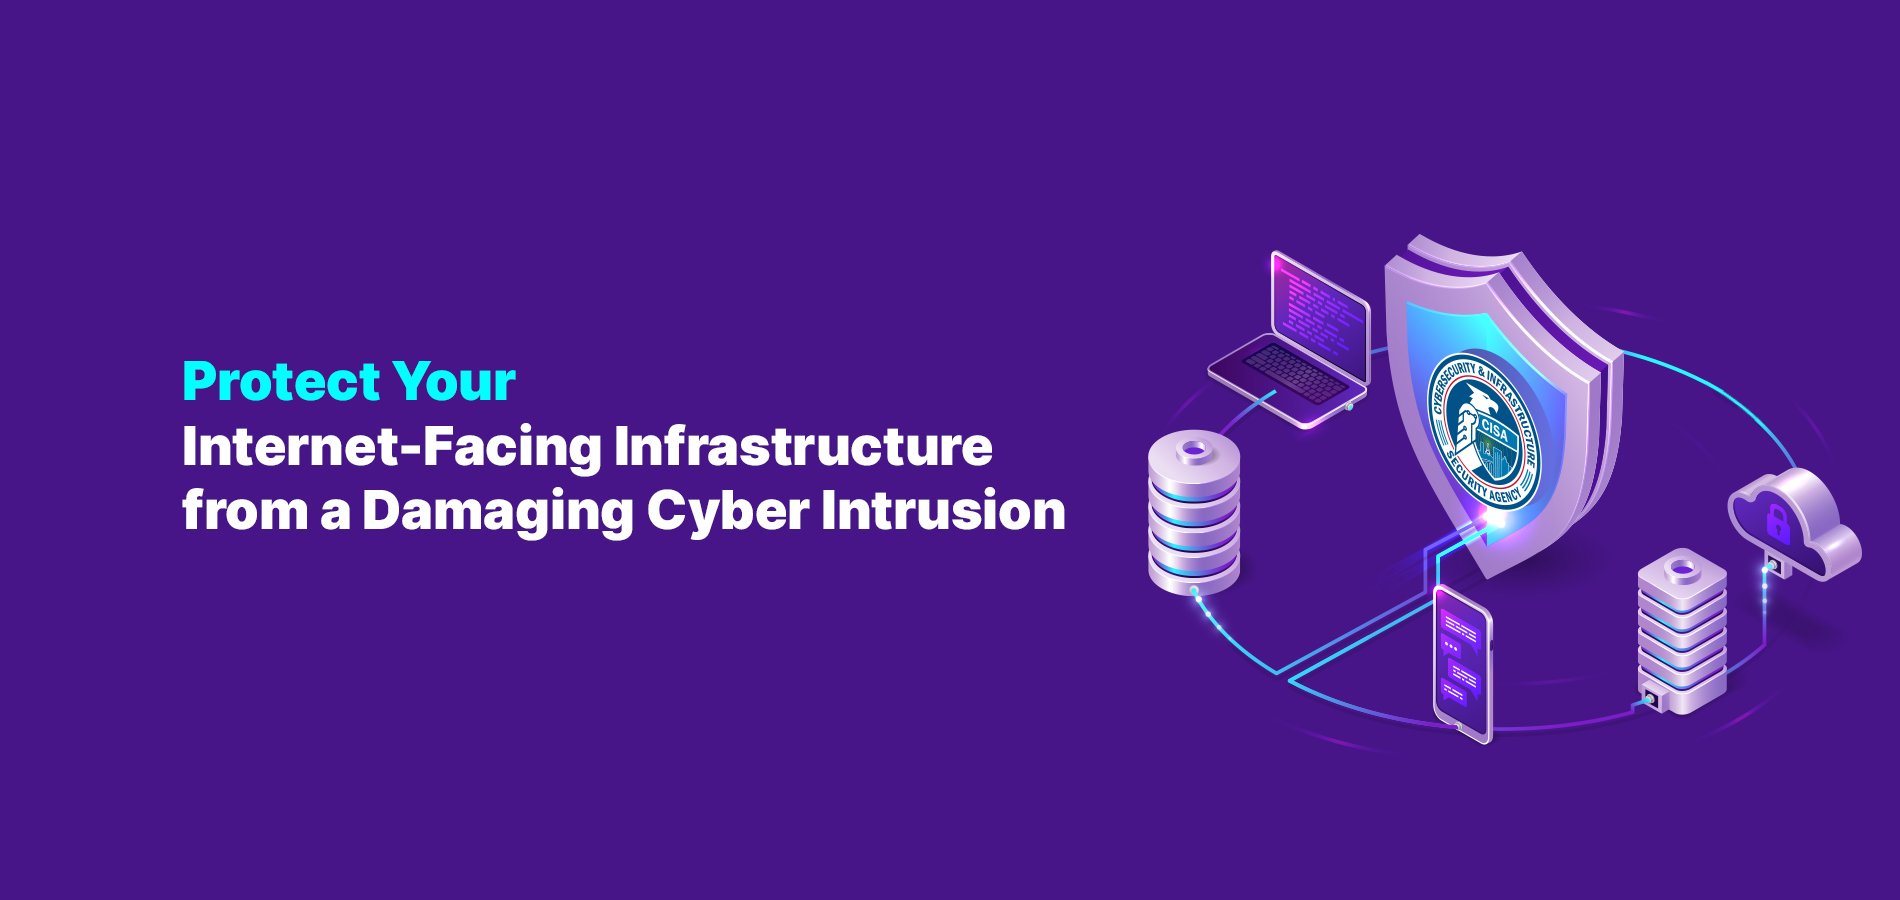 Protect Your Internet-Facing Infrastructure from Damaging Cyber Intrusion.